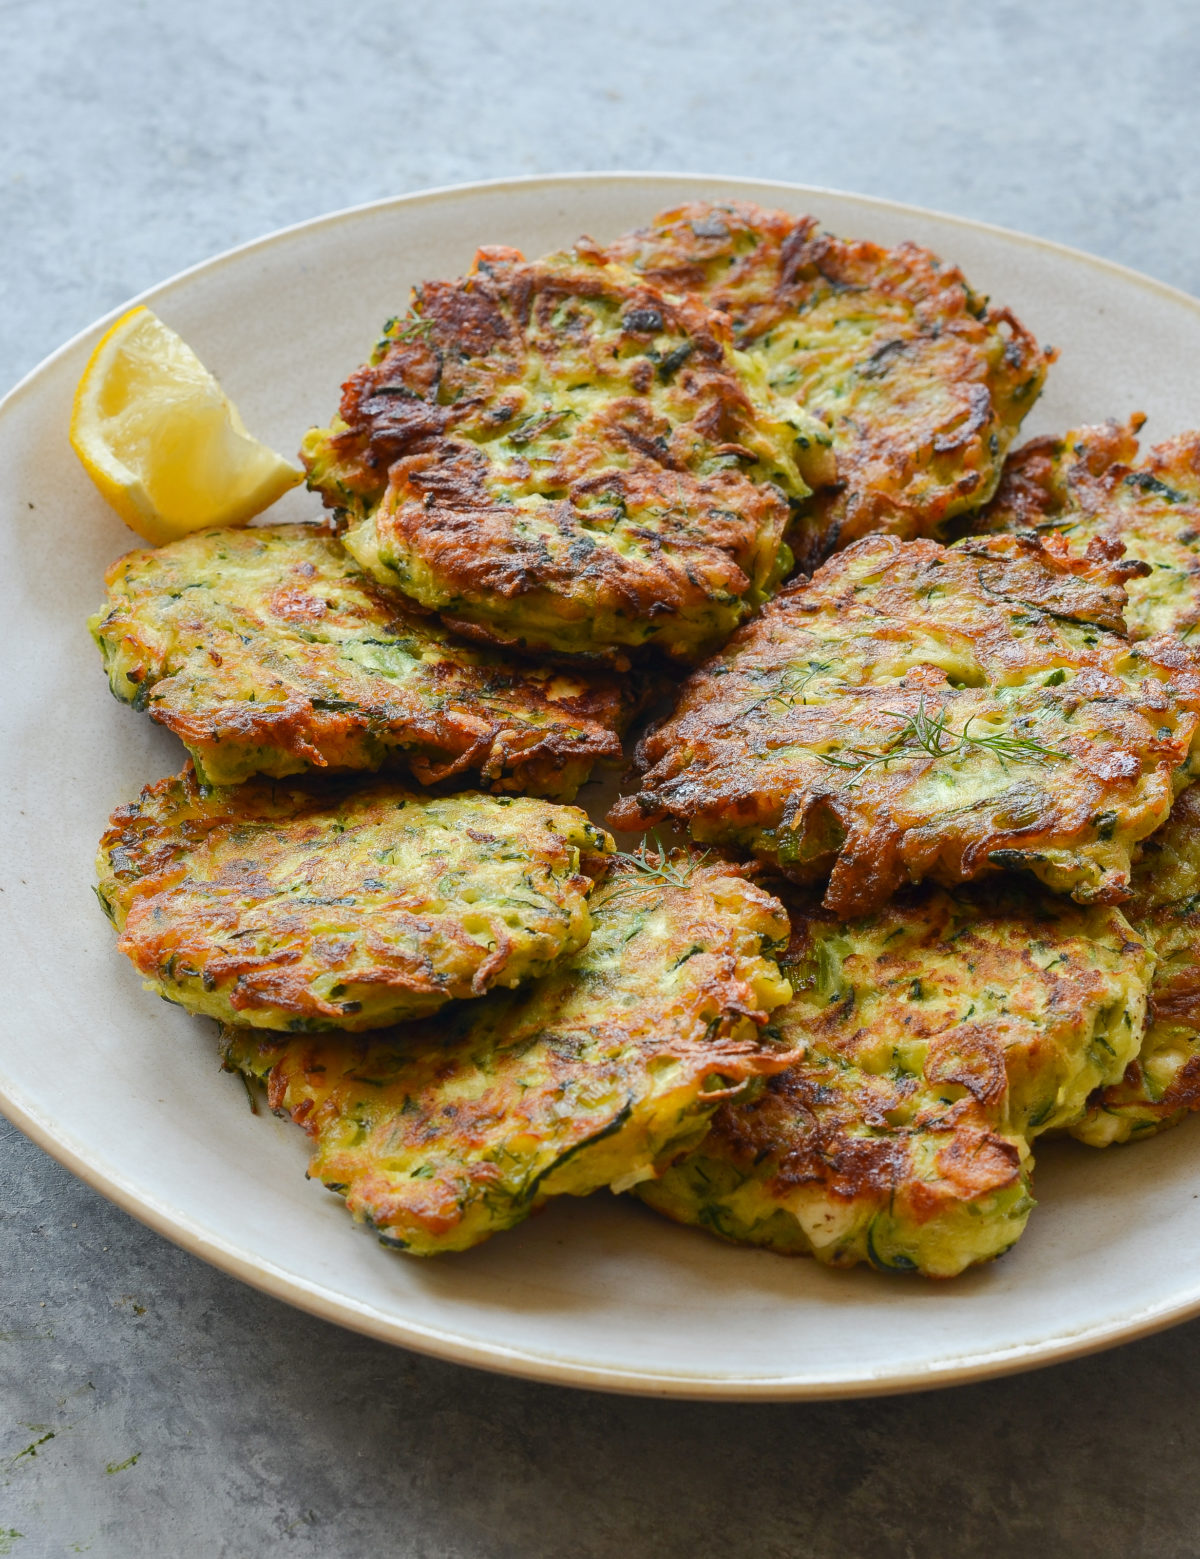 Plate of zucchini fritters with feta and dill.